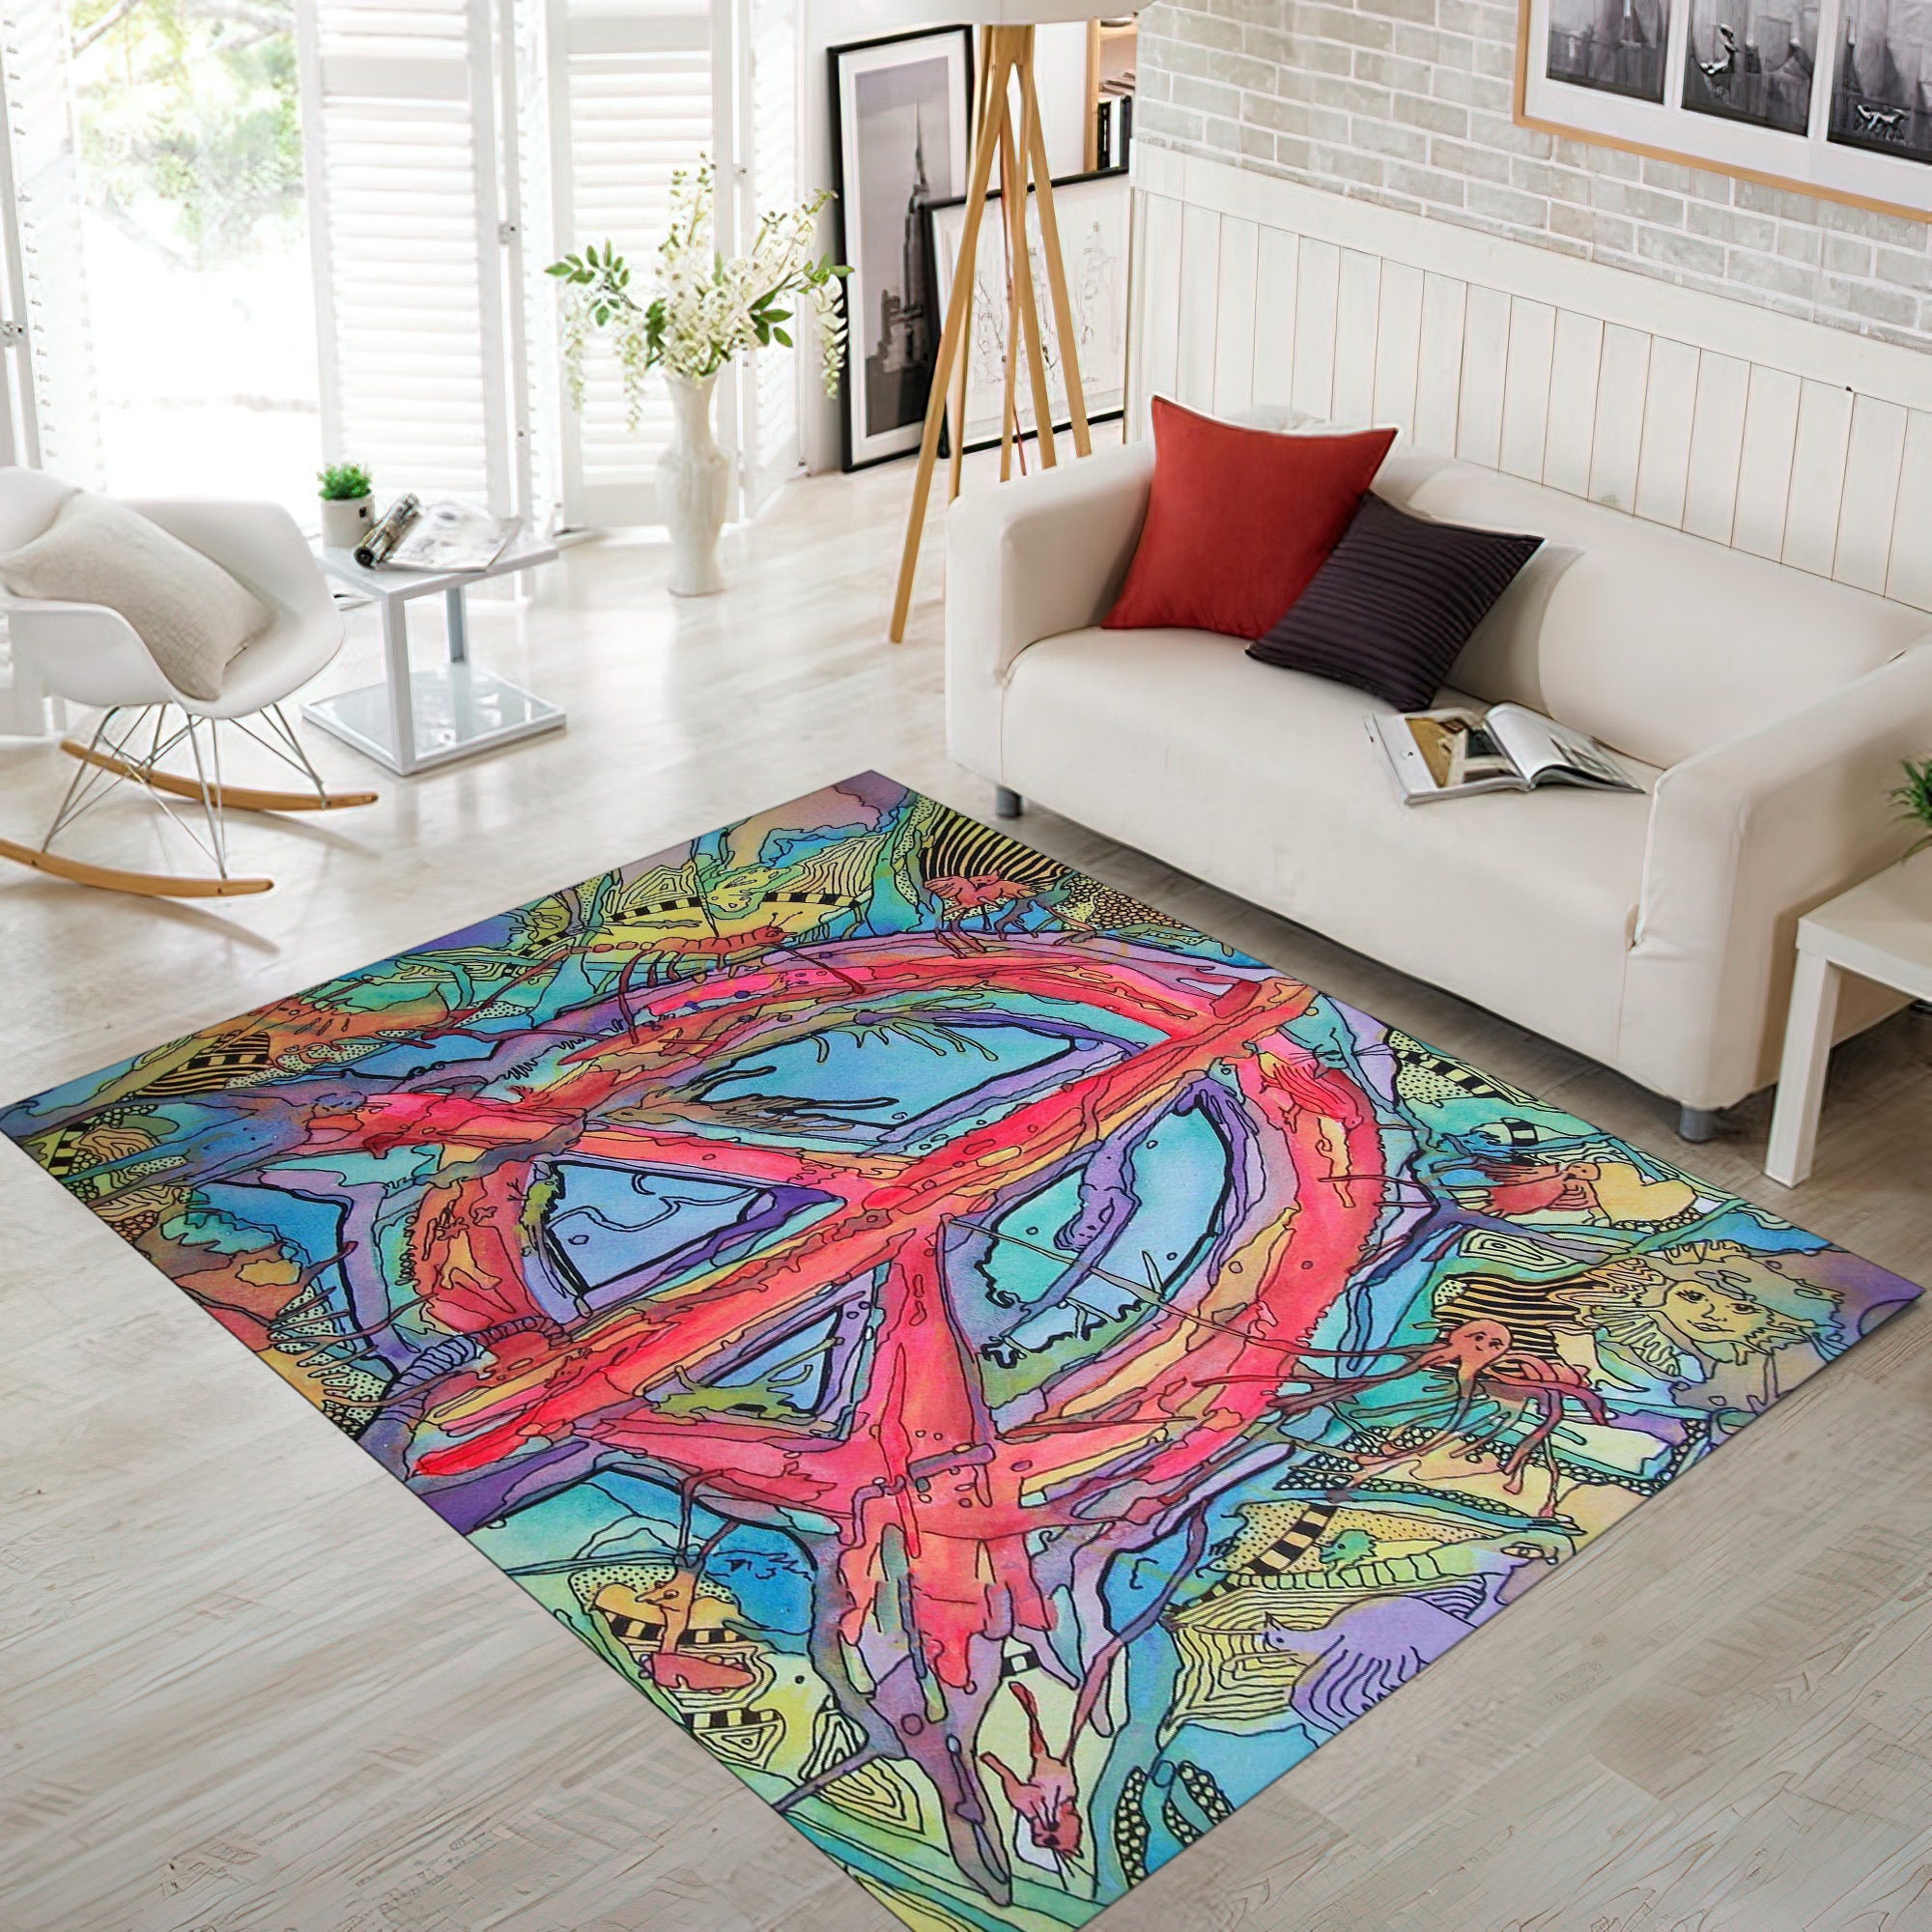  Round Fringe Shag Rugs Psychedelic Mushroom and Flower Vintage  Style Print Boho Circle Throw Area Rug Kids Girl Room Decor Carpet with  Tassels for Powder Room Nursery Playroom, 4' : Home